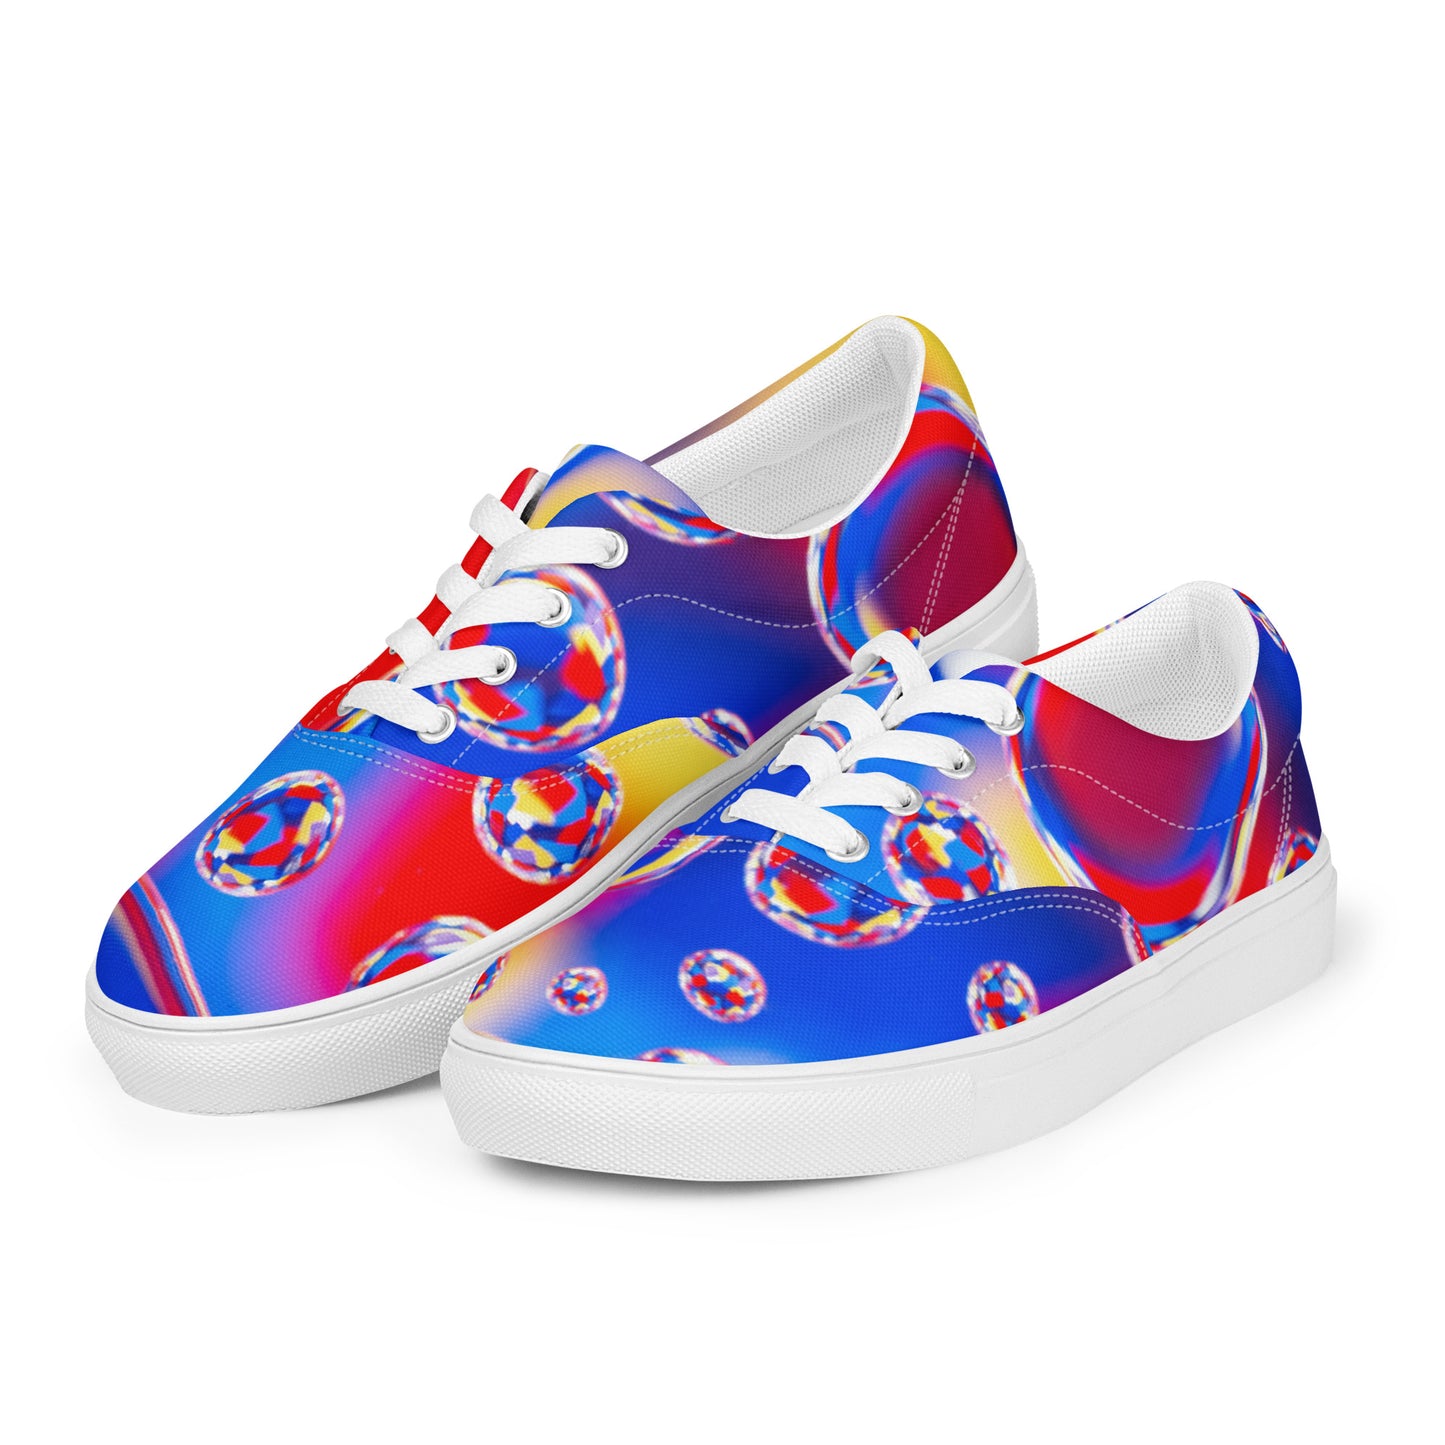 TRIPPIES by DOLVING - Women’s lace-up canvas shoes